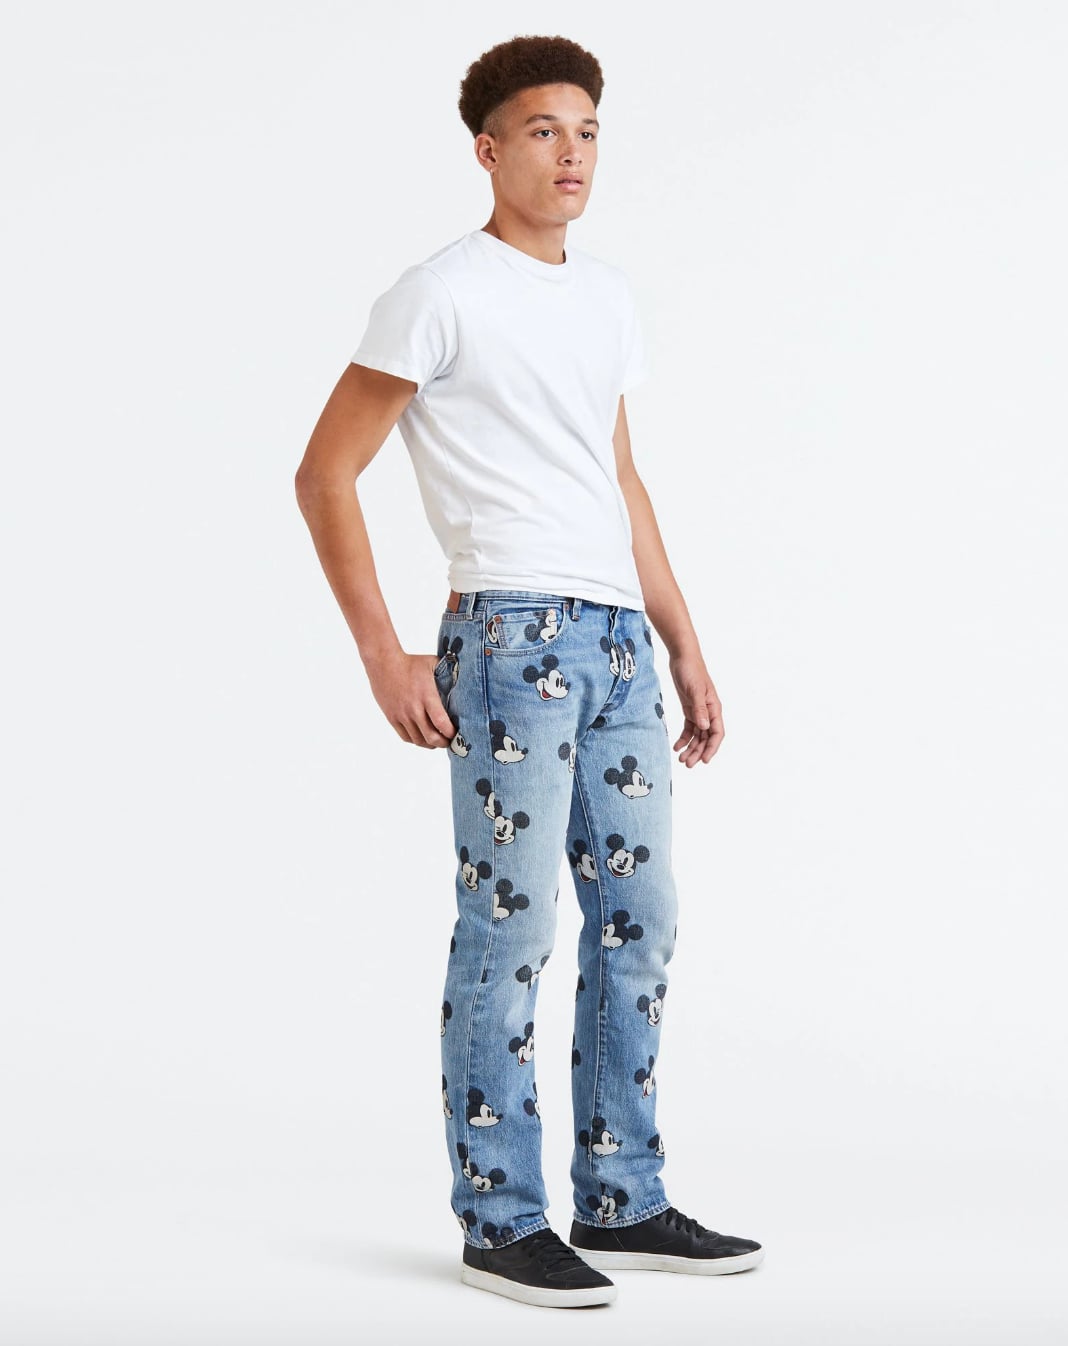 levis jeans mickey mouse